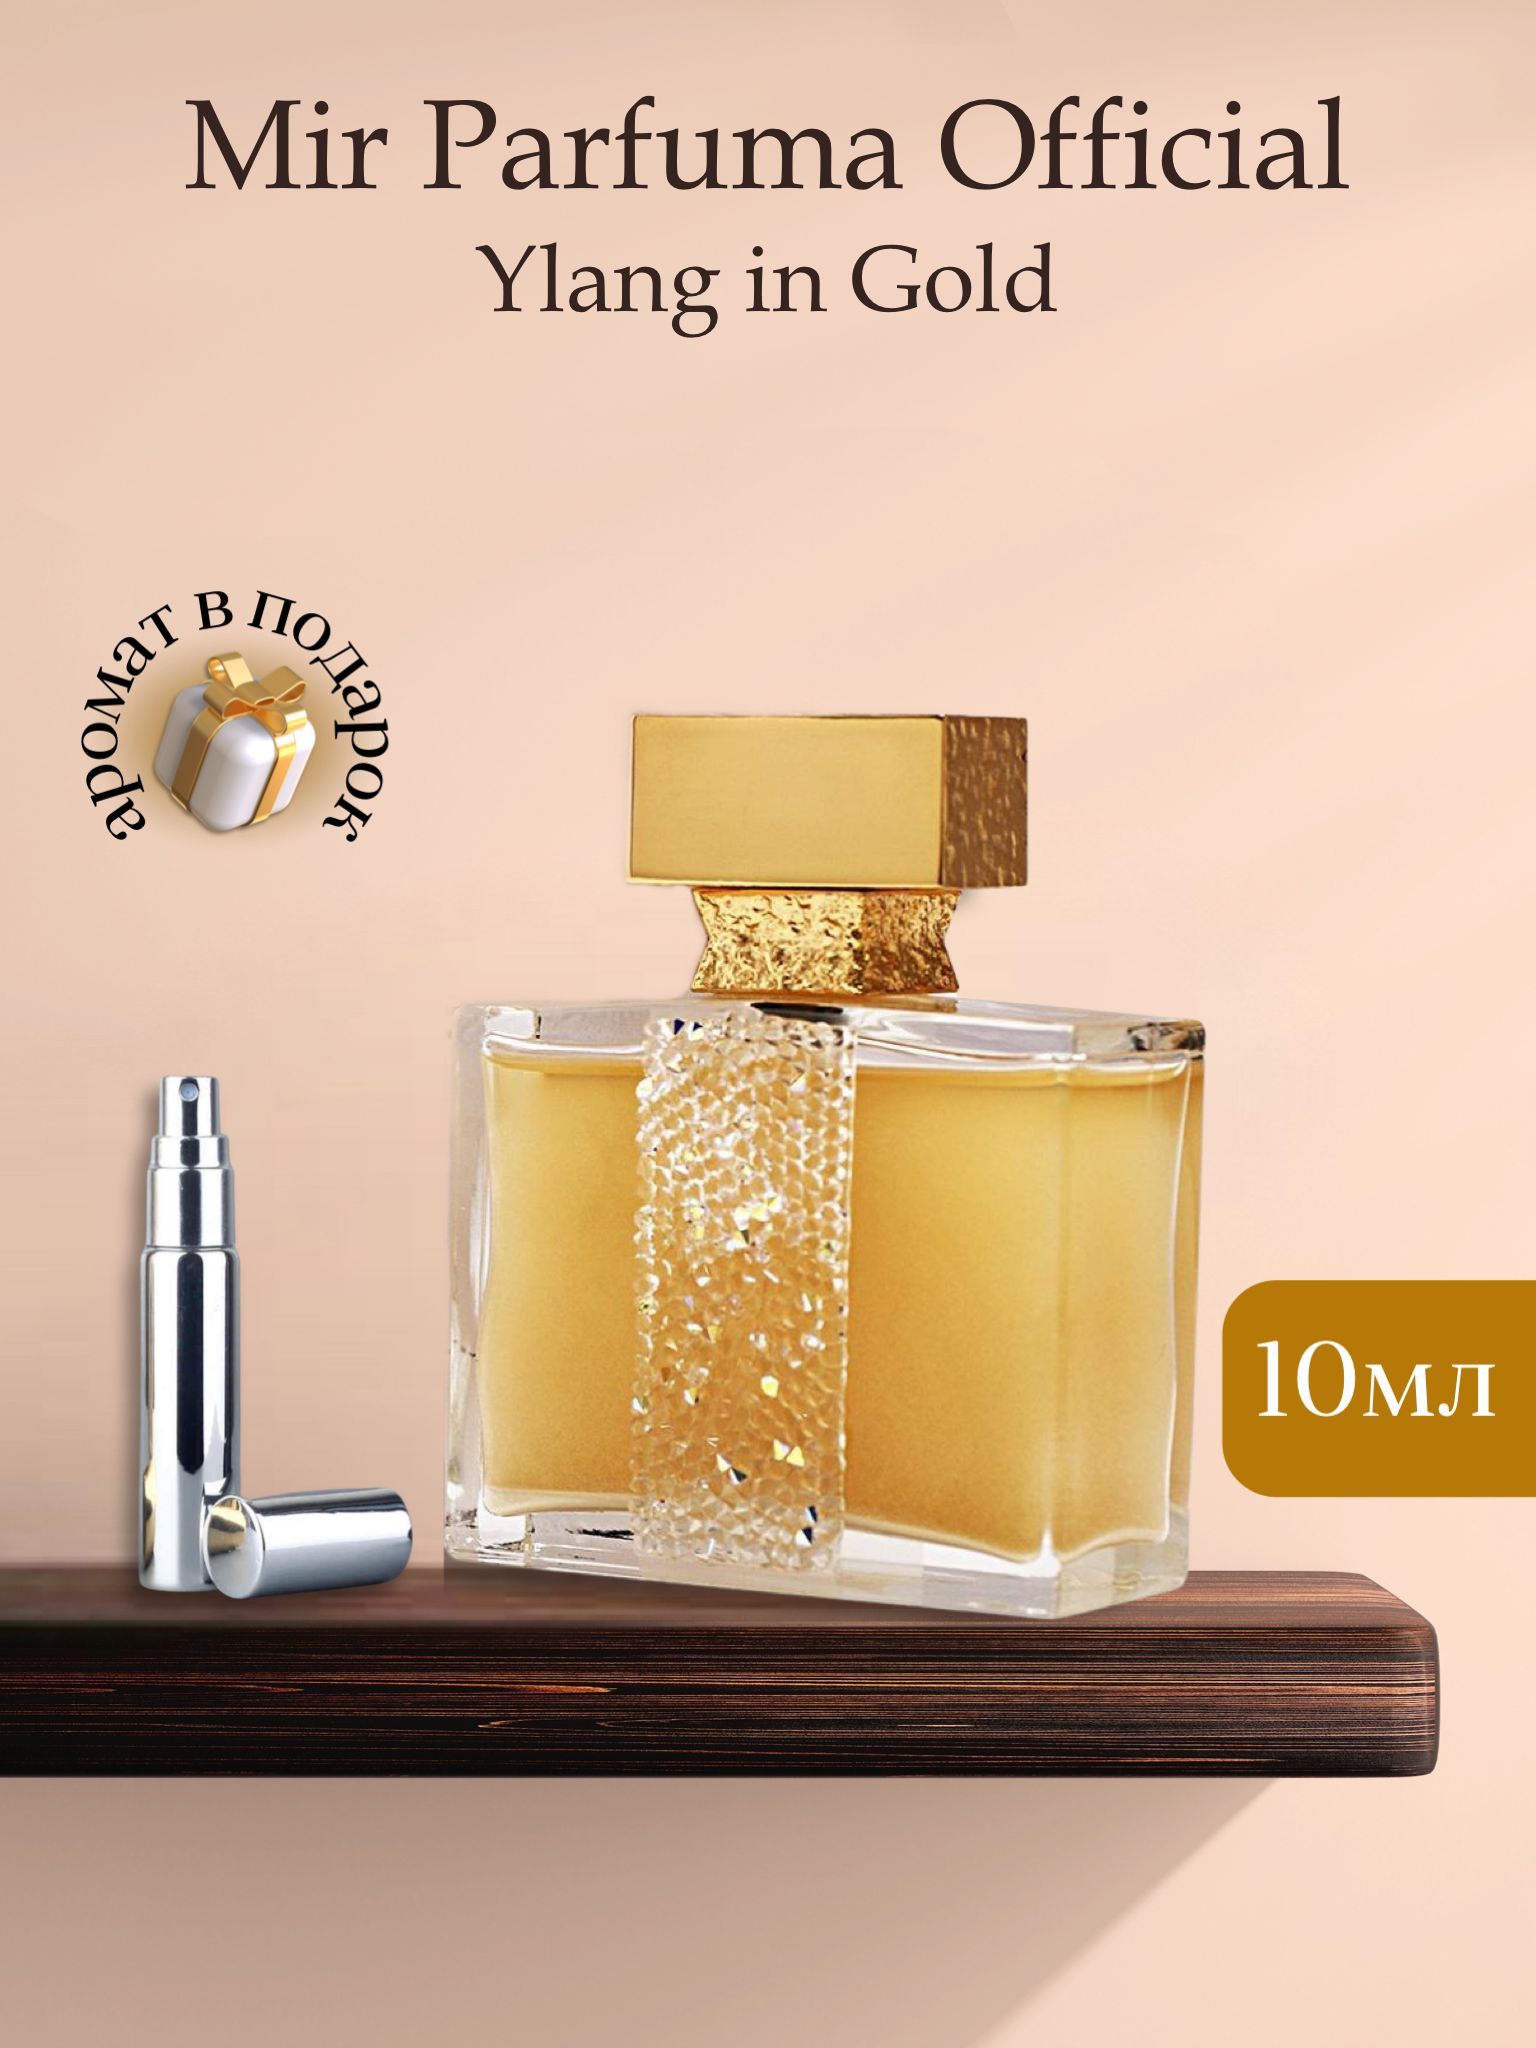 Ylang in gold. M. Micallef Ylang in Gold, 100 ml. Ylang in Gold m. Micallef 30 ml. Духи Micallef Ylang in Gold. M. Micallef иланг в золоте.